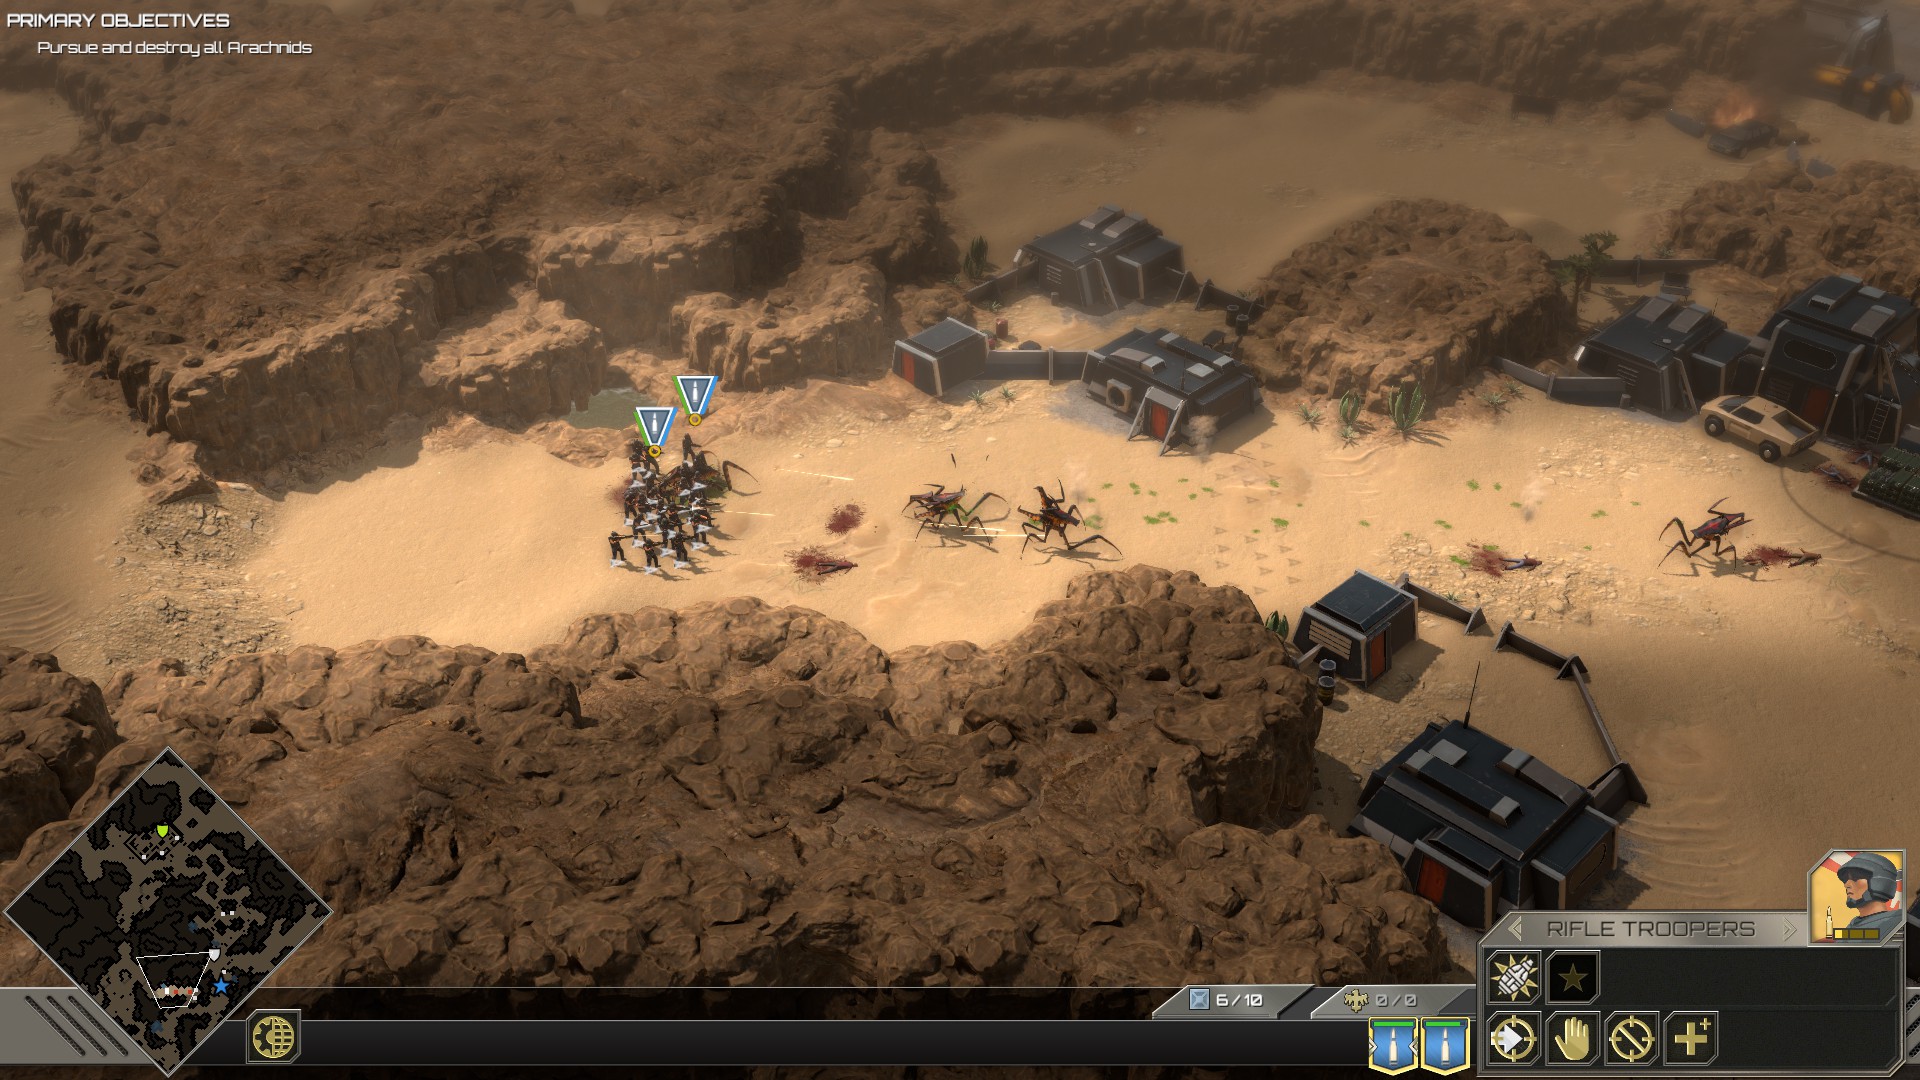 Starship Troopers – Terran Command demo | Preview in 7 Screenshots